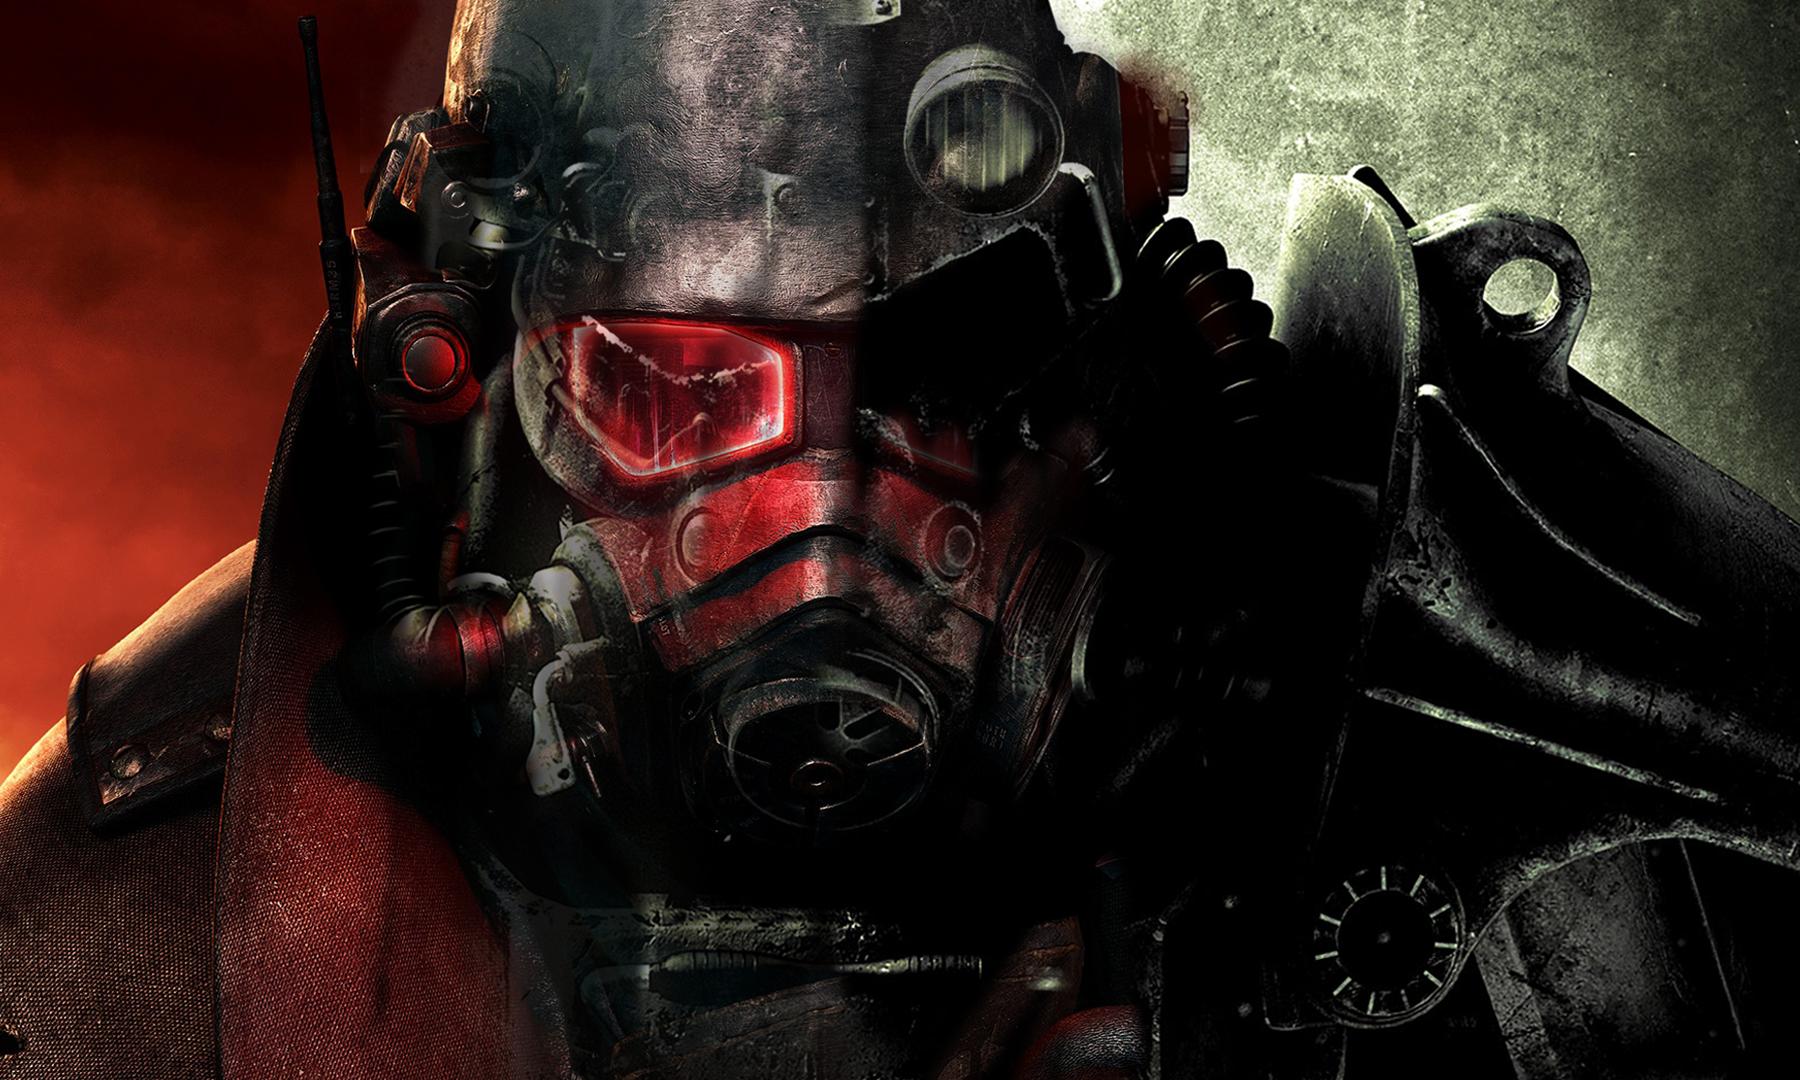 The Fallout 3 Players' Guide to New Vegas for Fallout: New Vegas